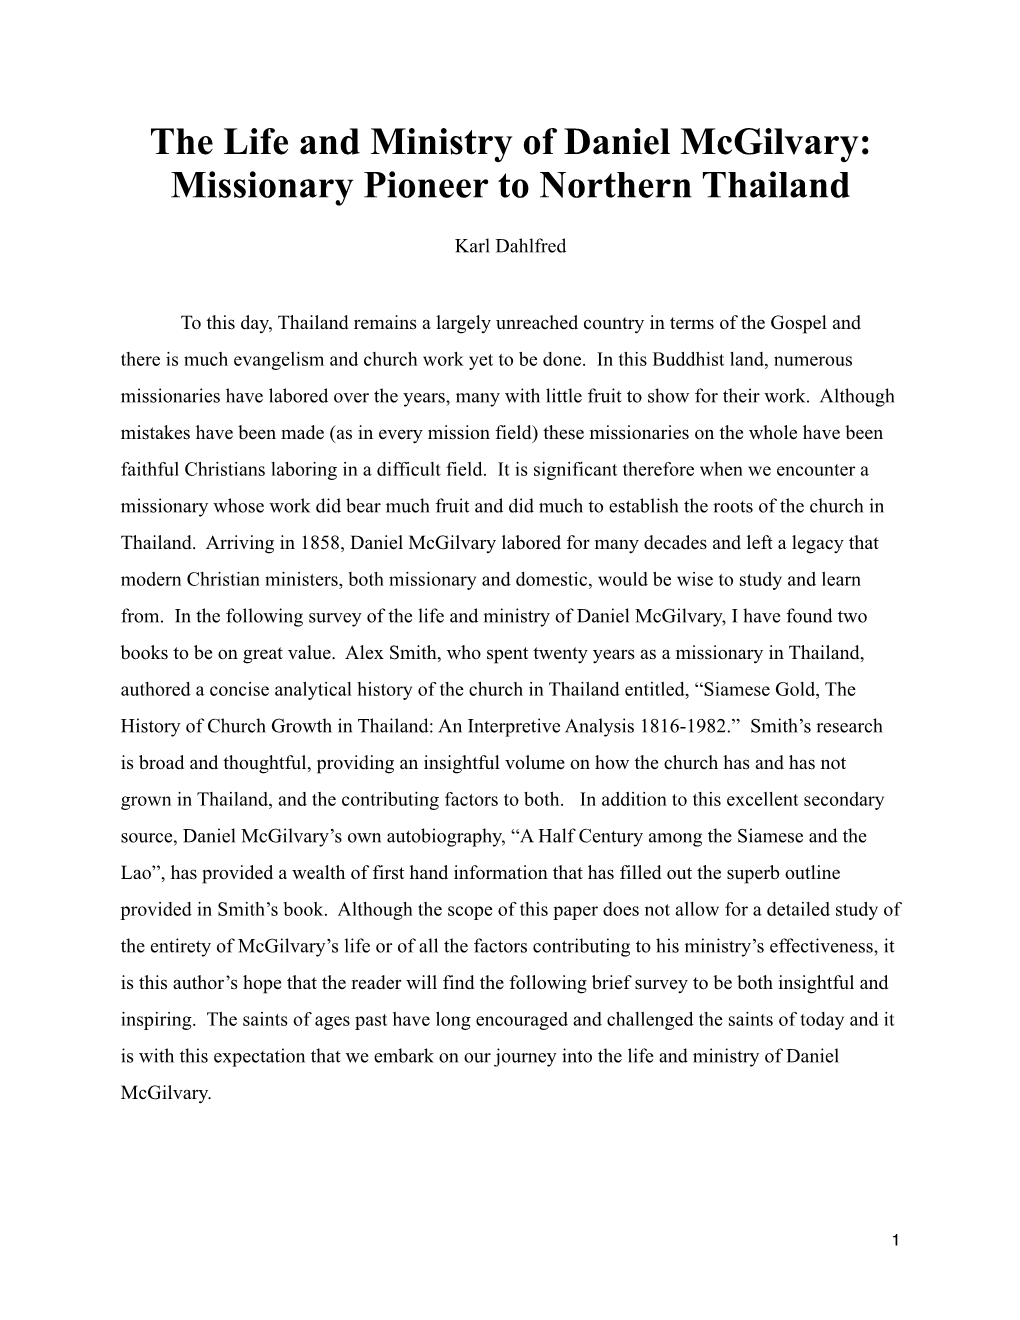 The Life and Ministry of Daniel Mcgilvary- Missionary Pioneer To